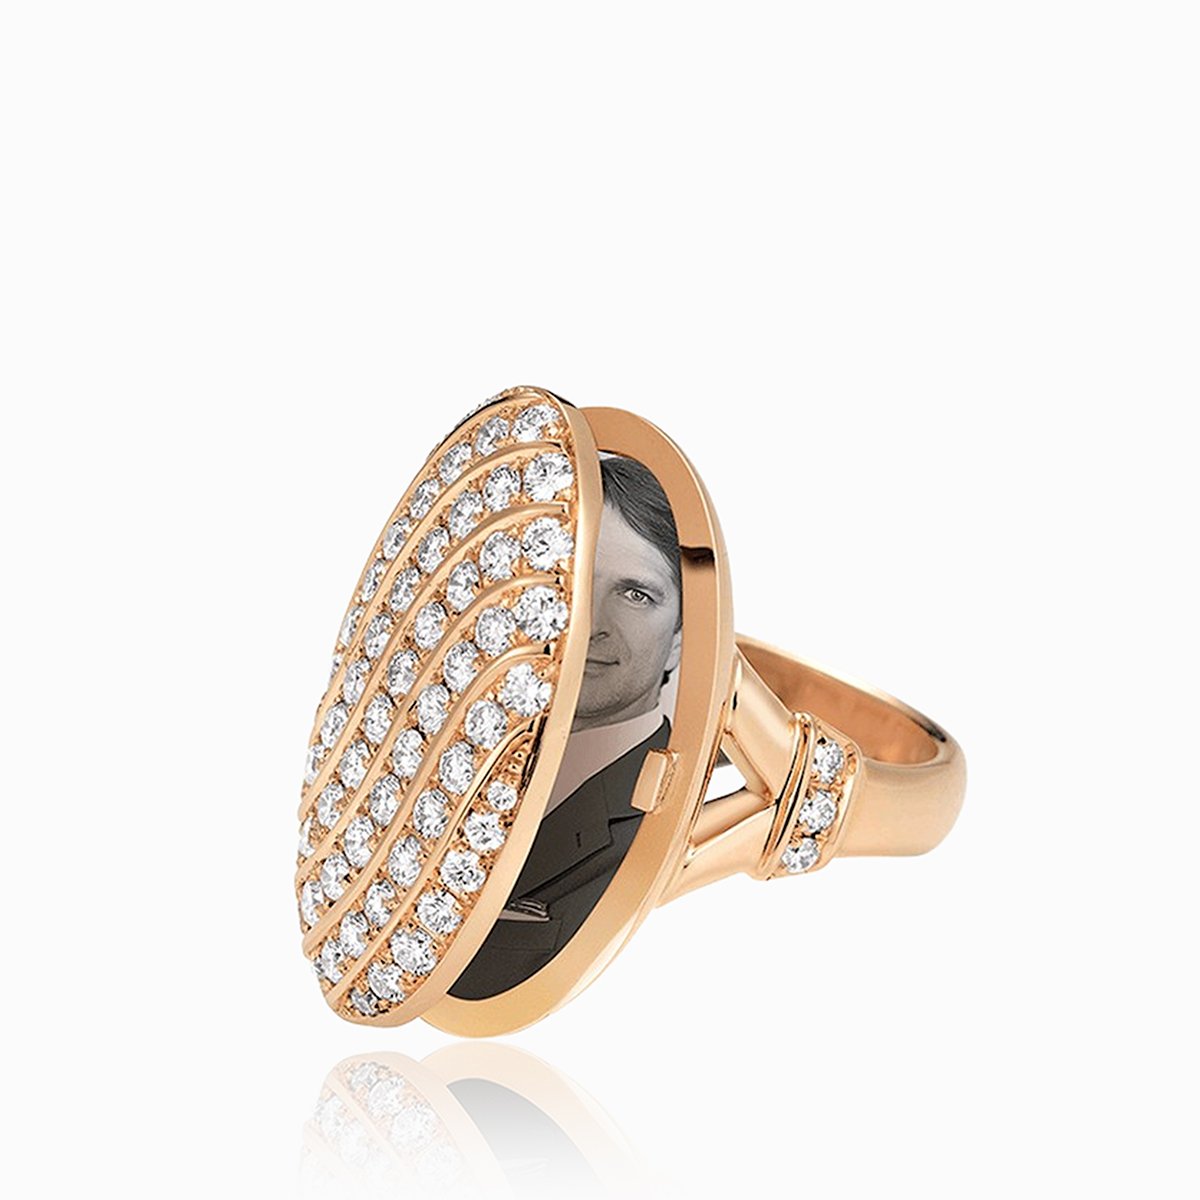 Open view of an 18 ct rose gold oval locket ring pave set with diamonds in a swirling design. The shank is also set with diamonds.